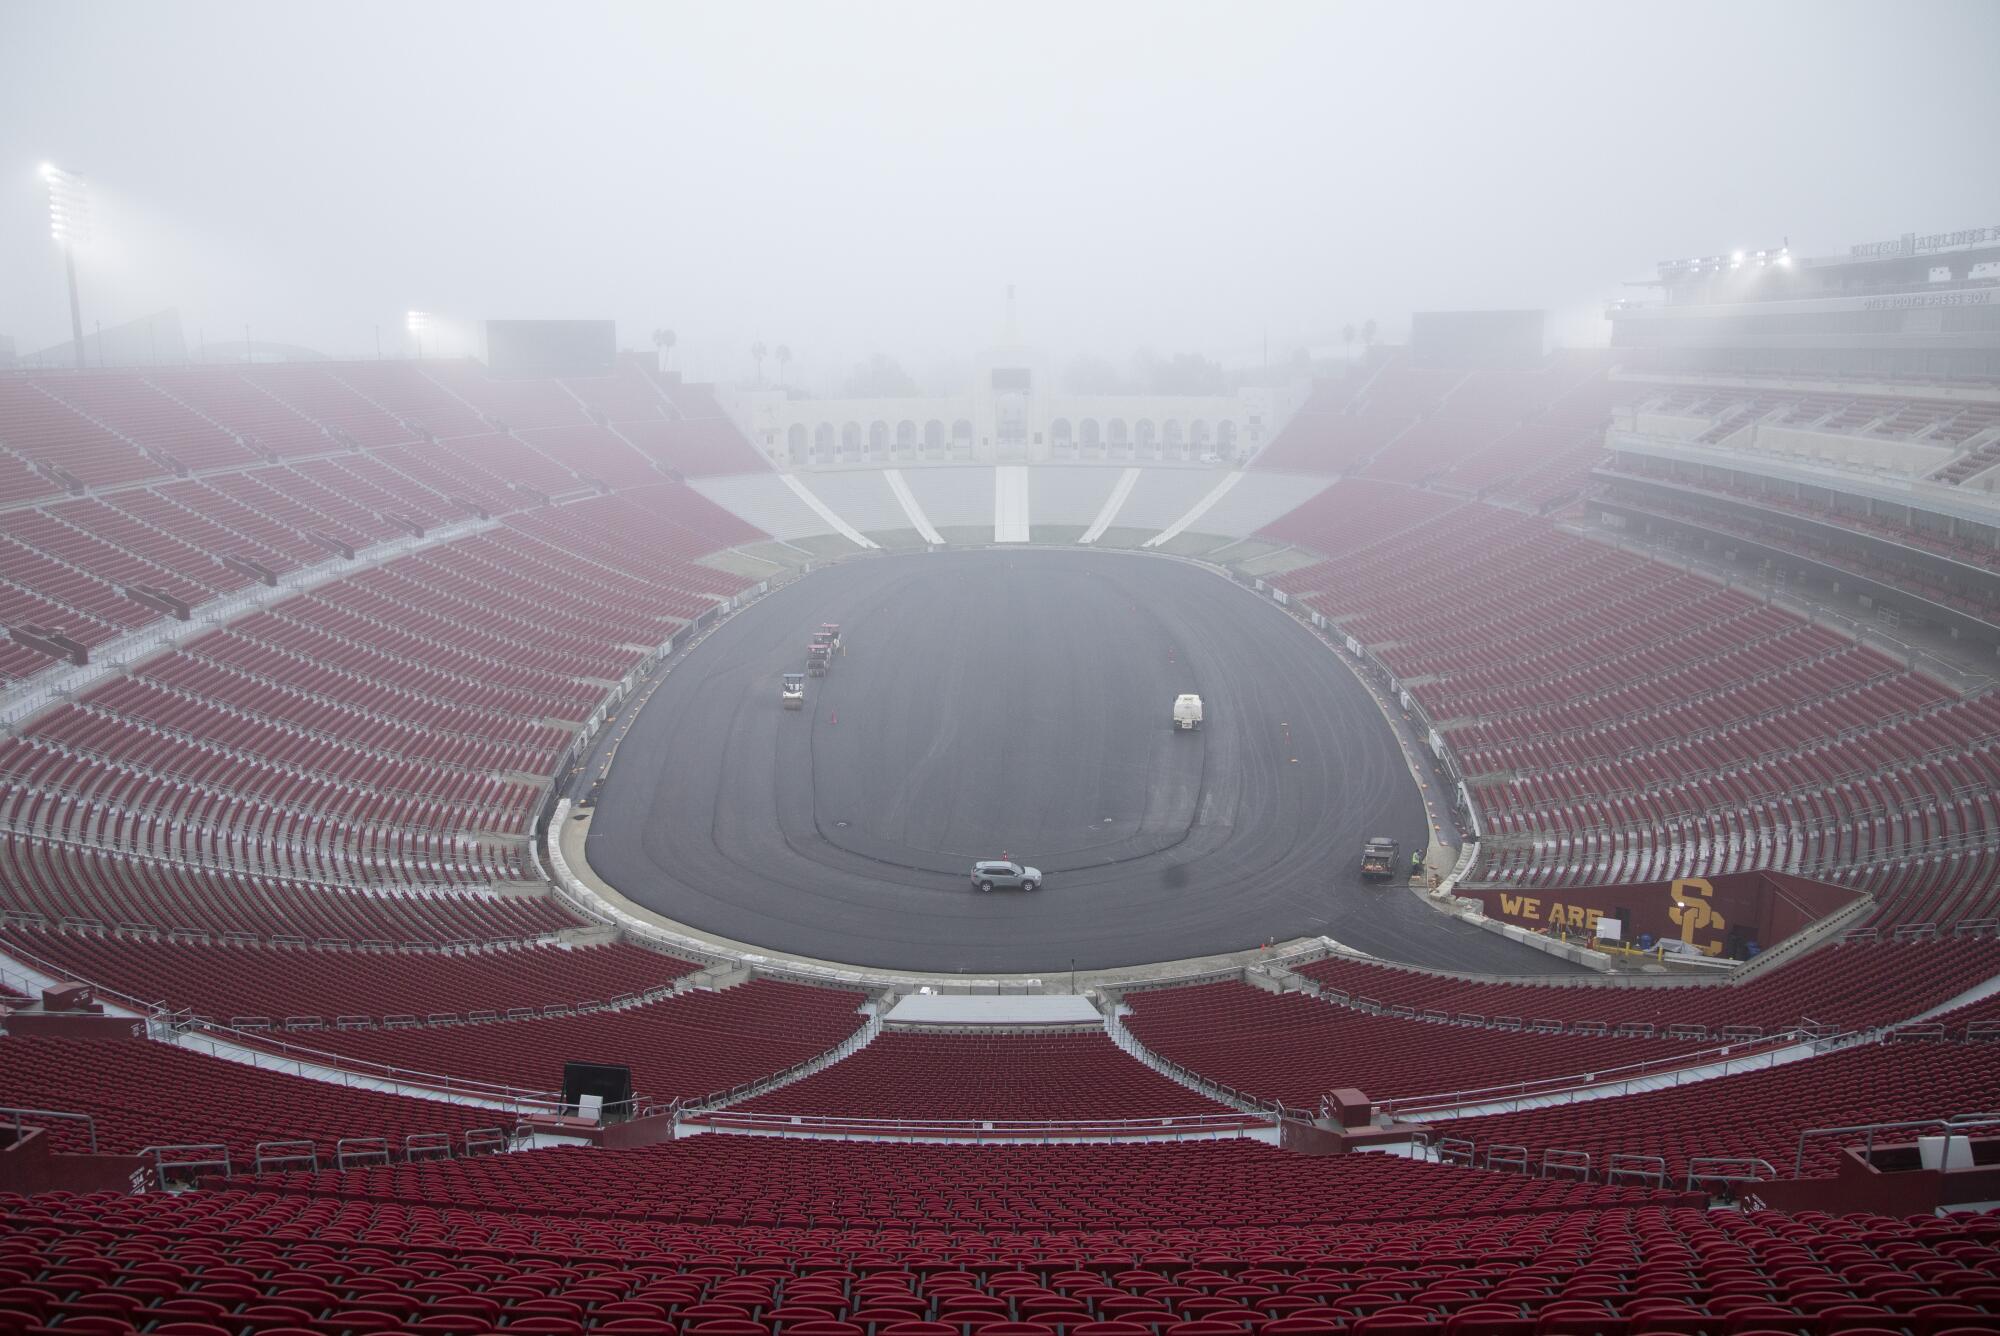 The Coliseum is being converted to a race track for the Busch Light Clash at the Coliseum NASCAR race